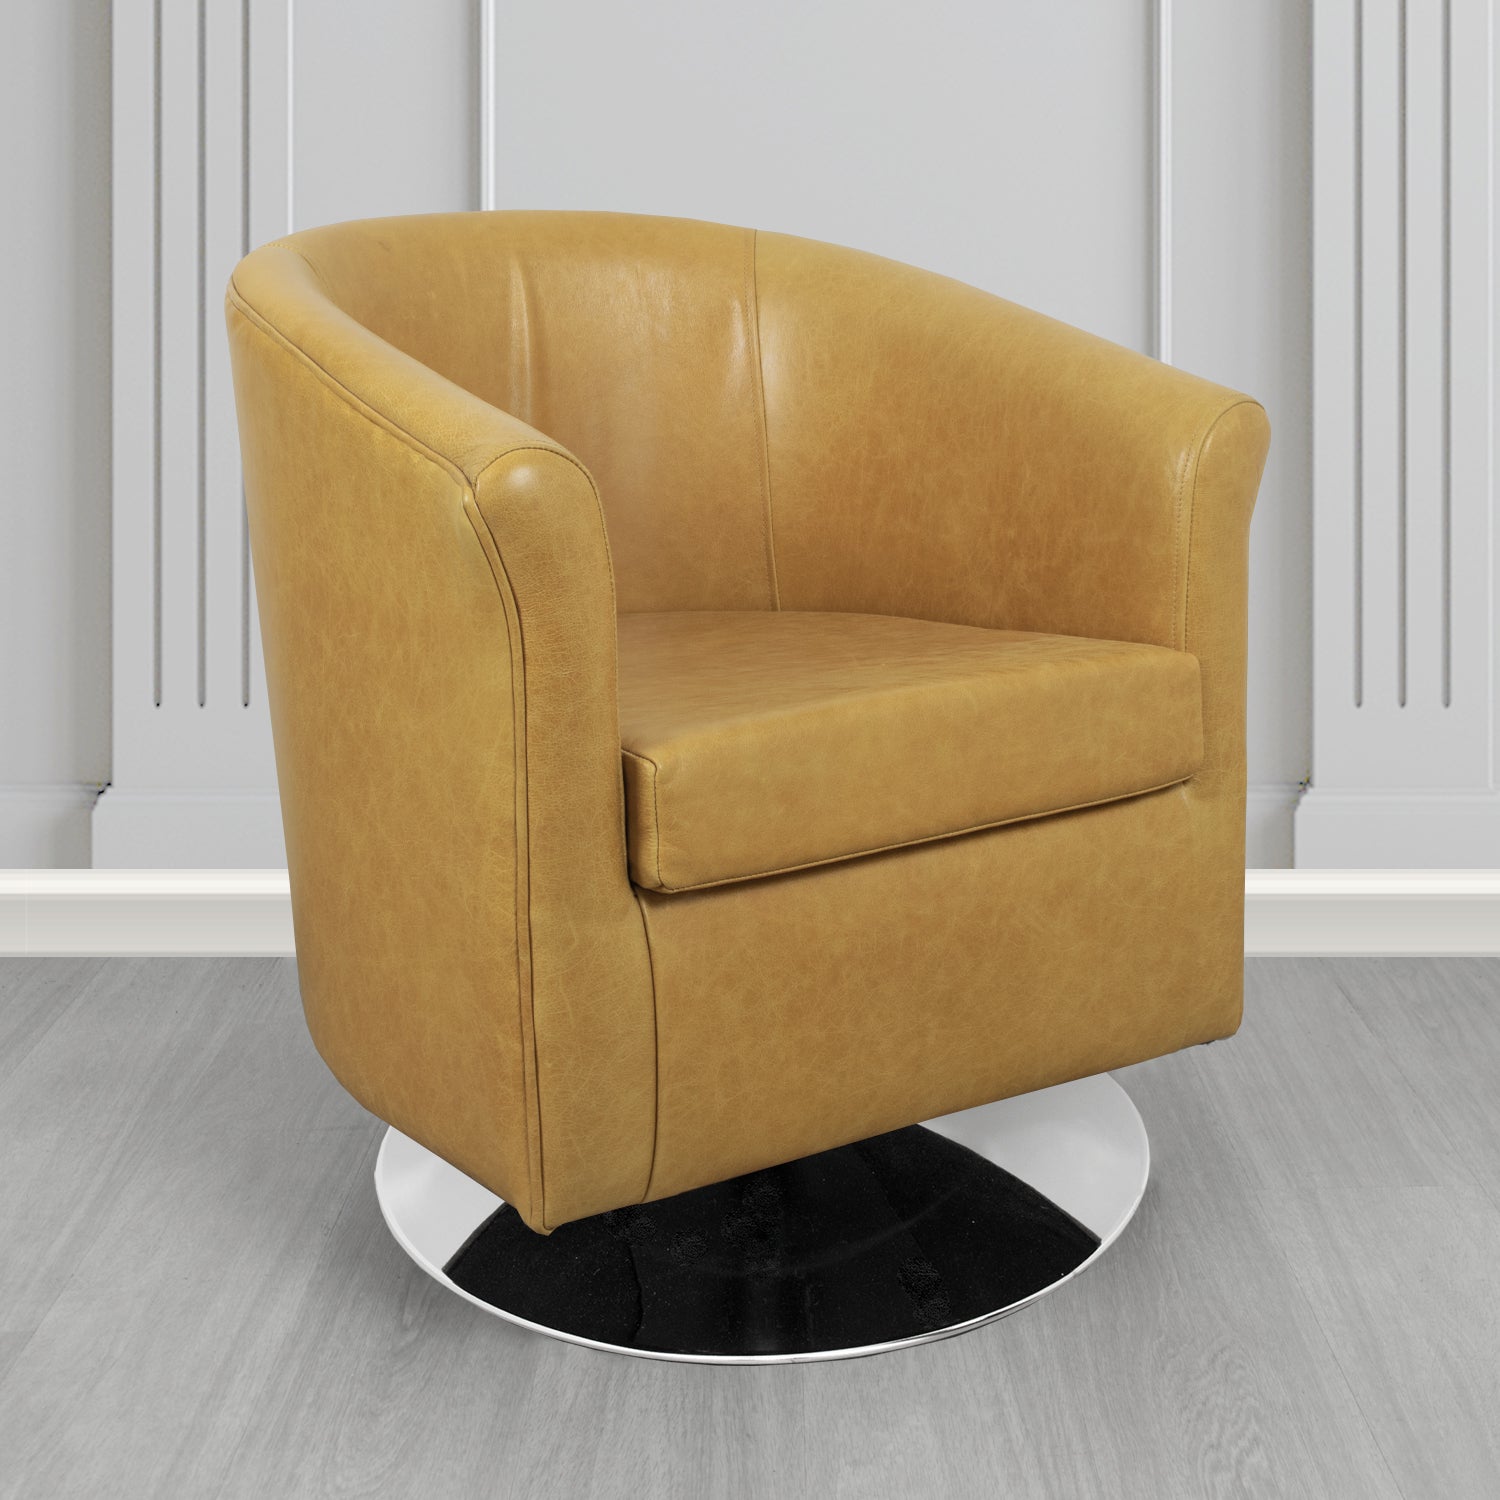 Tuscany Swivel Tub Chair in Crib 5 Old English Saddle Genuine Leather - The Tub Chair Shop